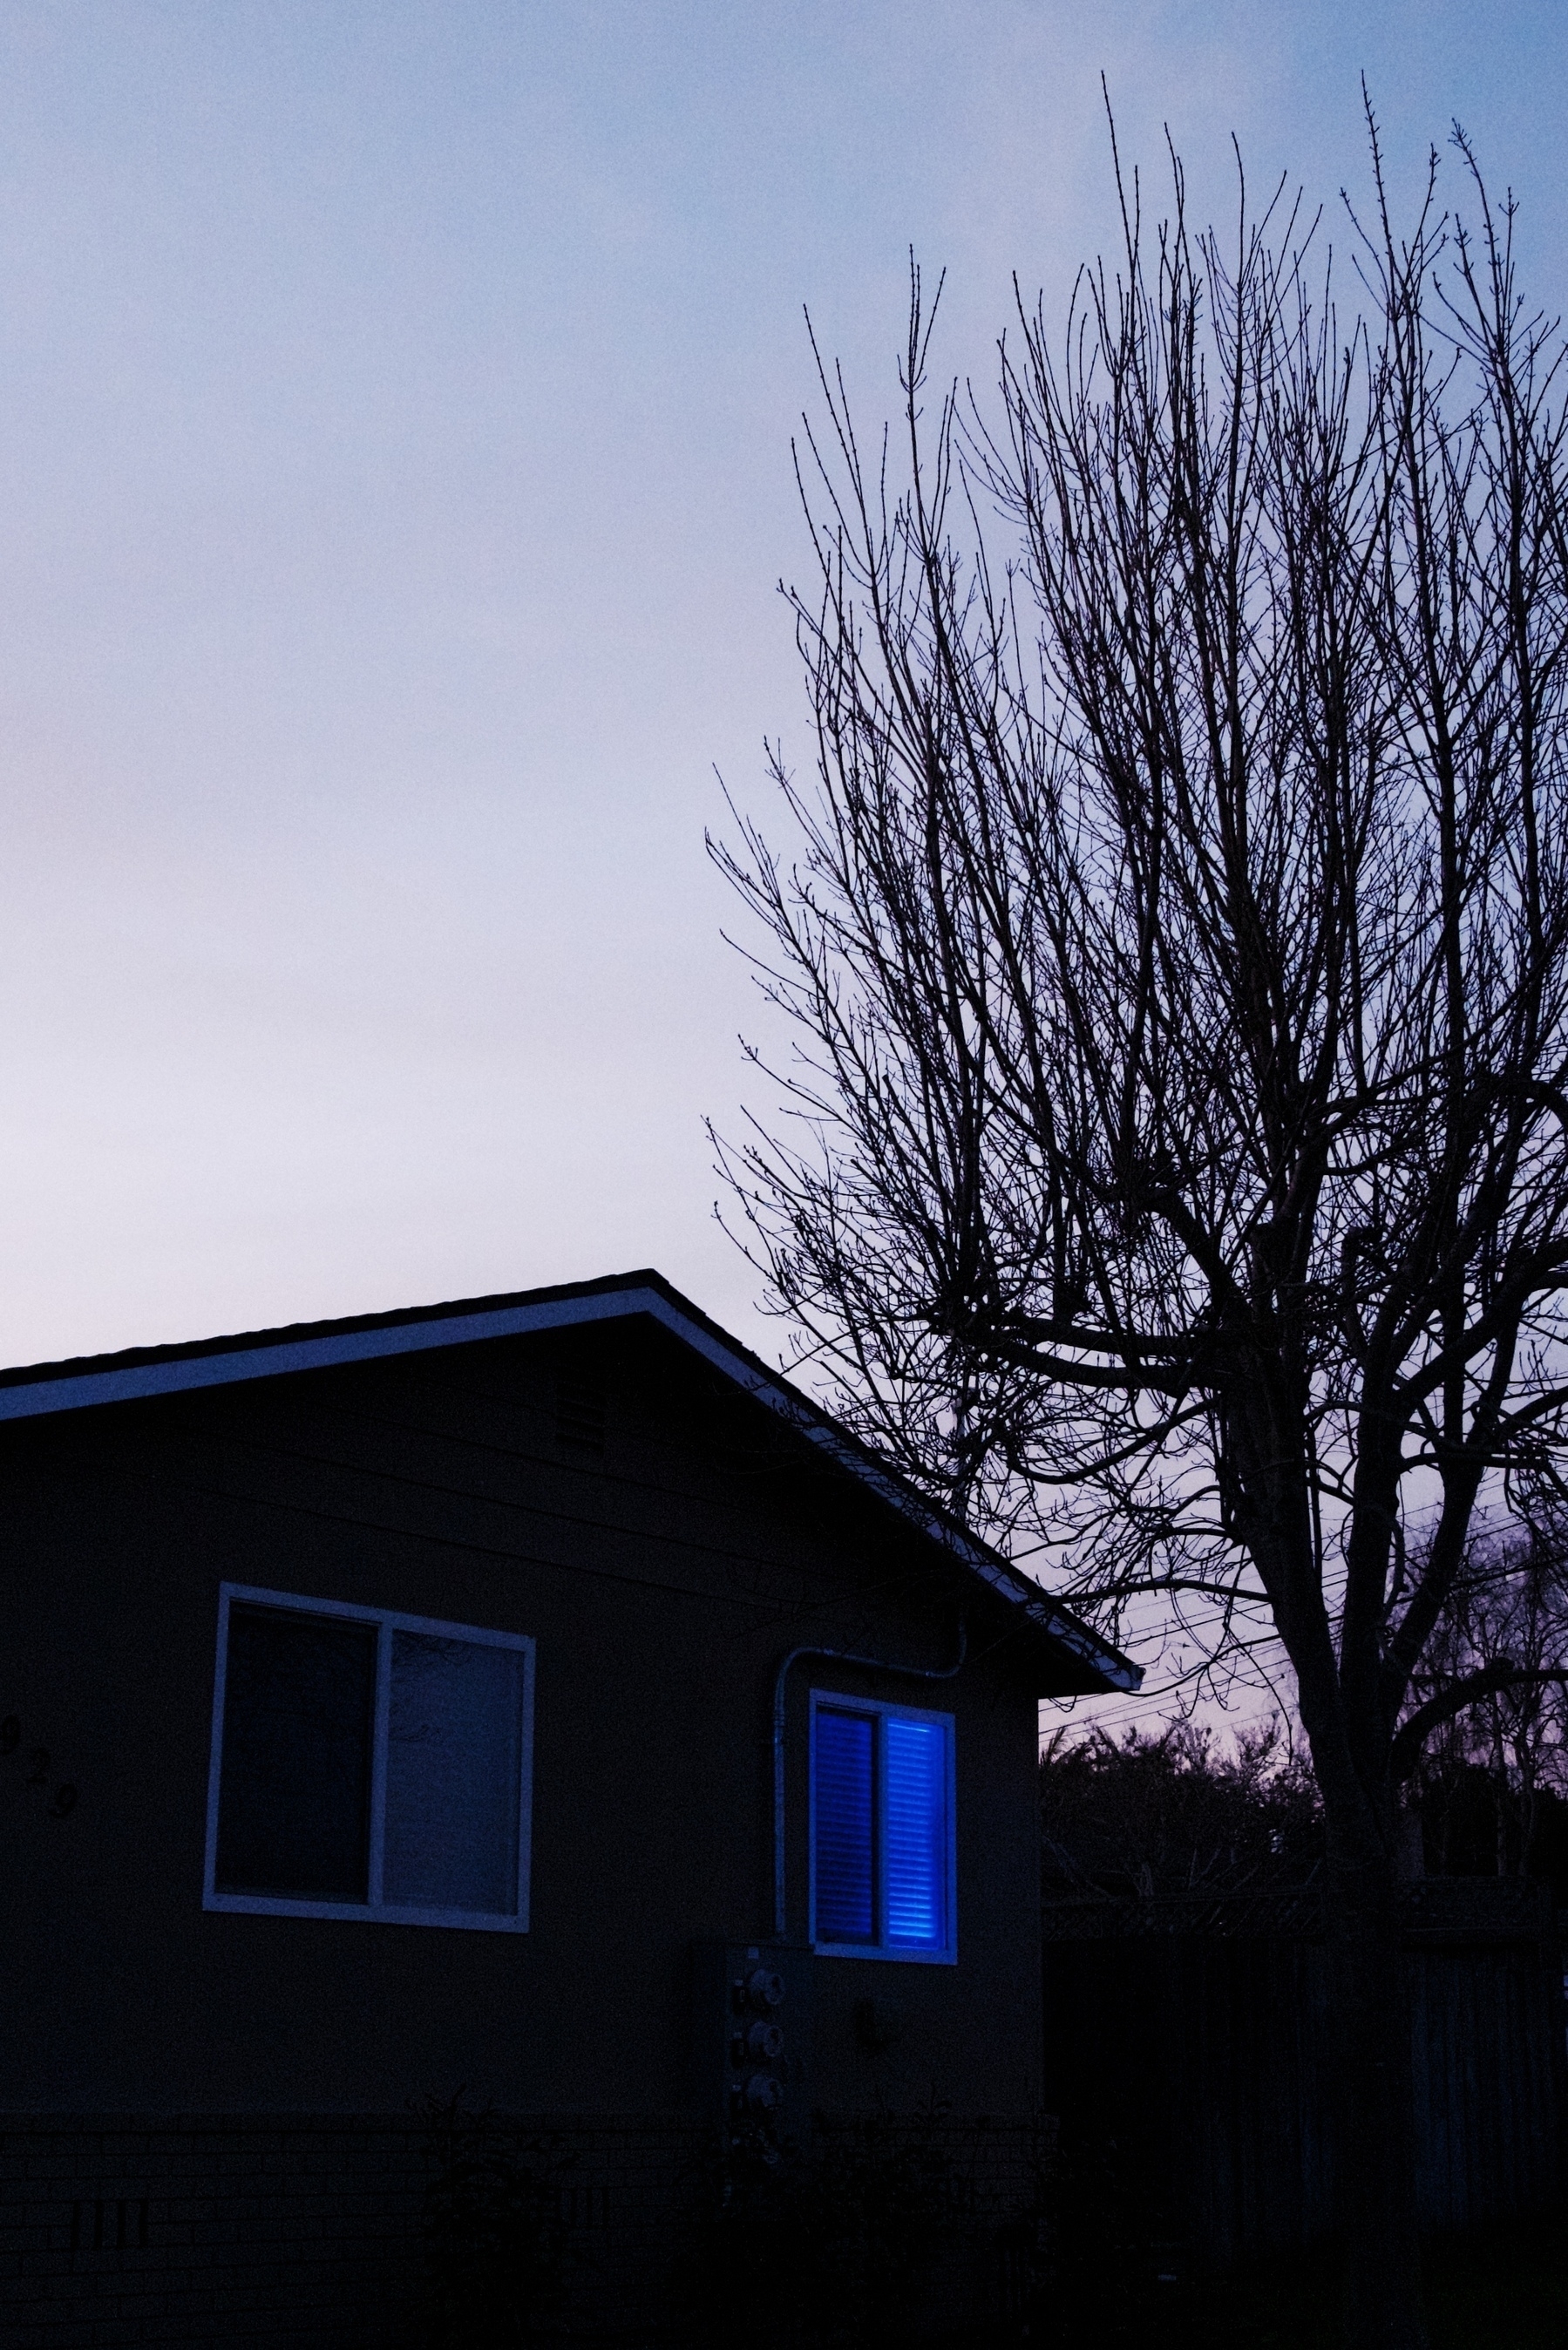 A house with intense blue light eminating from one window. A tree towers over it, having lost all its leaves in winter.